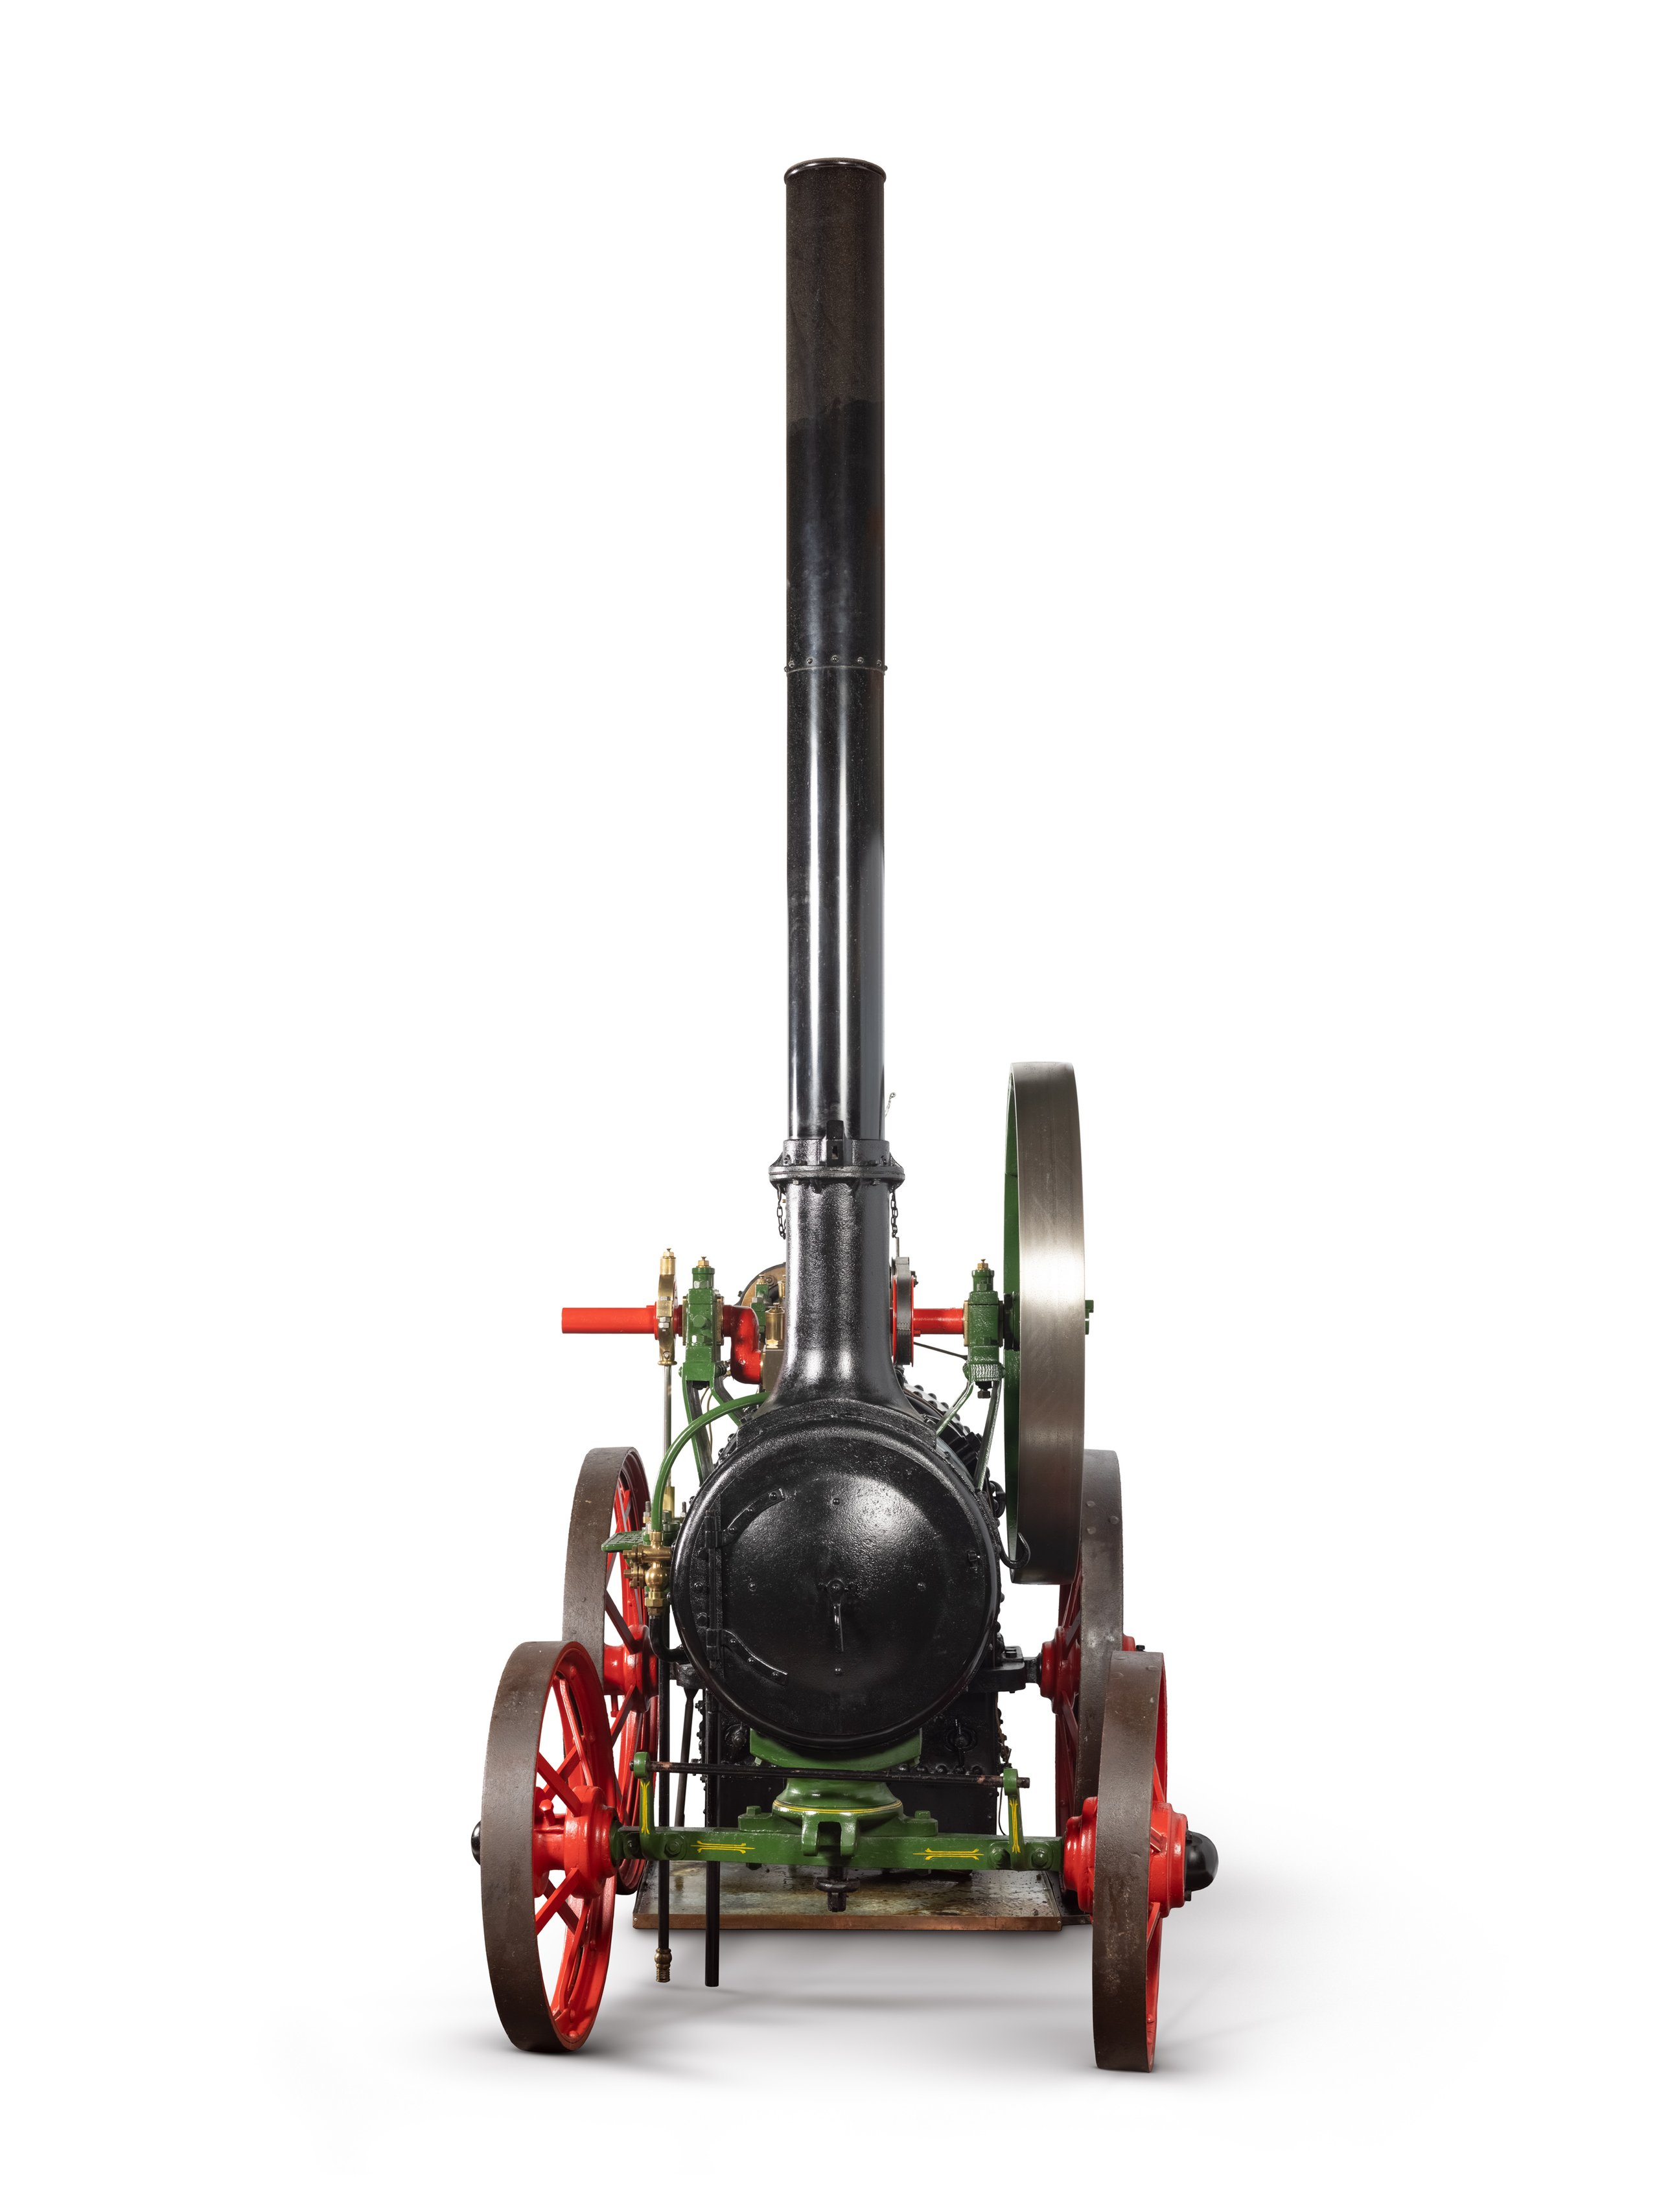 Ransomes Sims & Jefferies portable steam engine, 1904